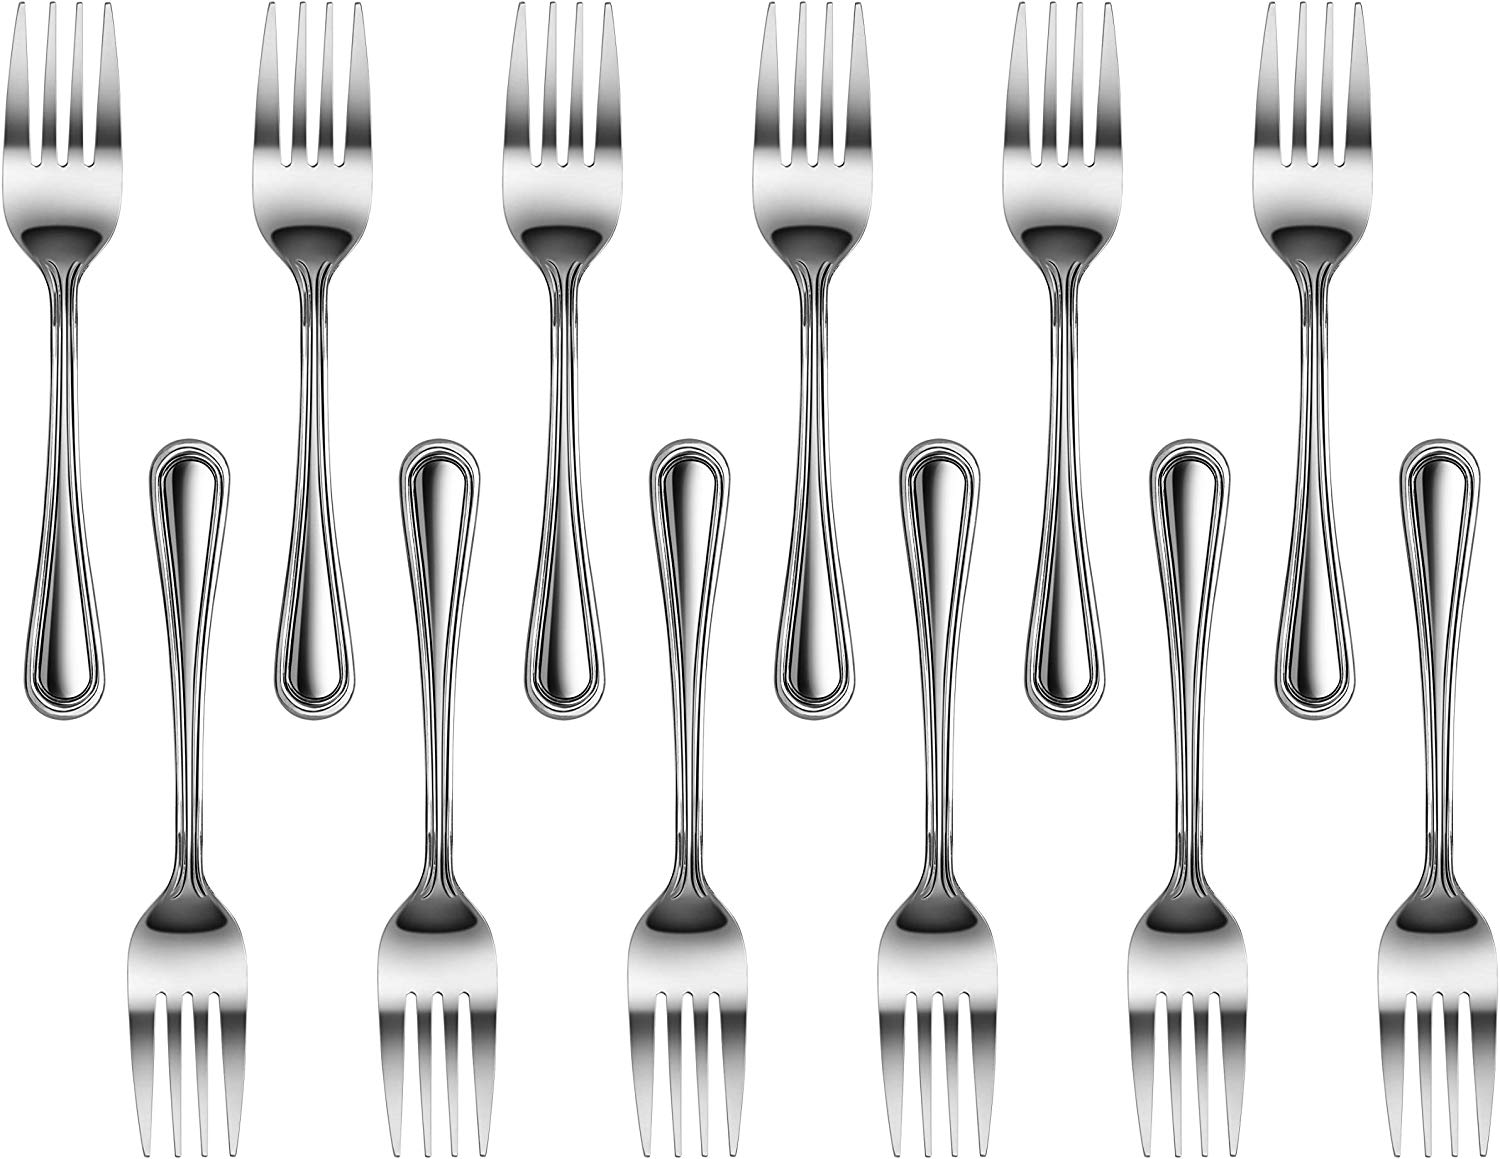 New Star Foodservice Classic Stain Resistant Salad Forks, 12-Piece